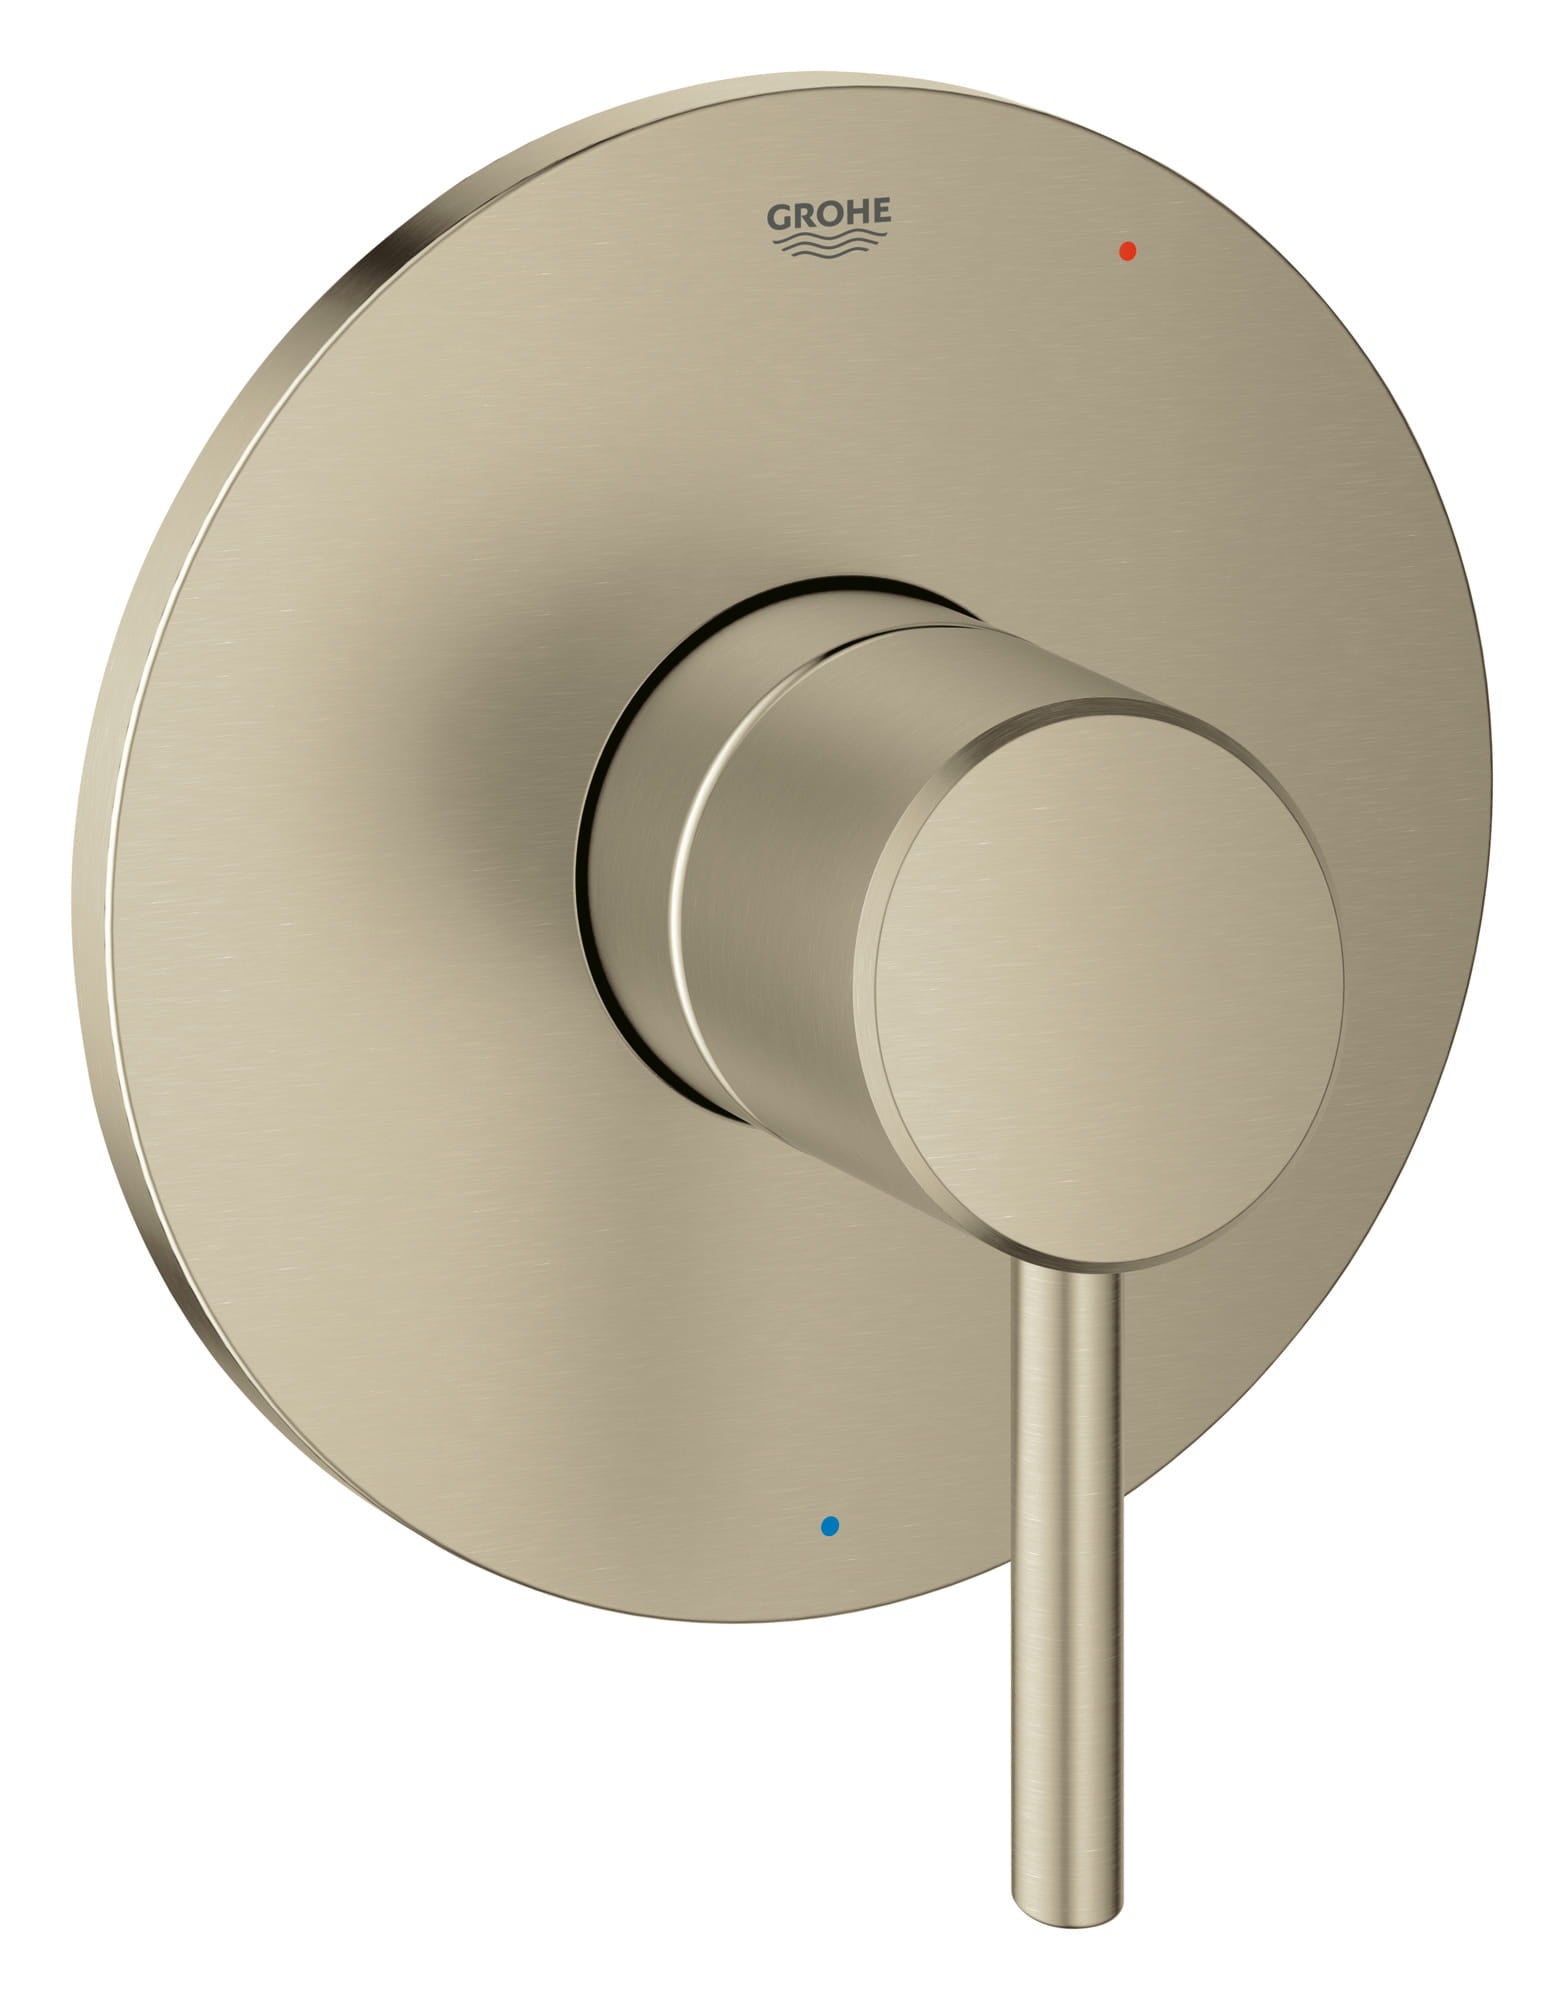 GROHE 14468EN0 Concetto Brushed Nickel Pressure Balance Valve Trim with Cartridge